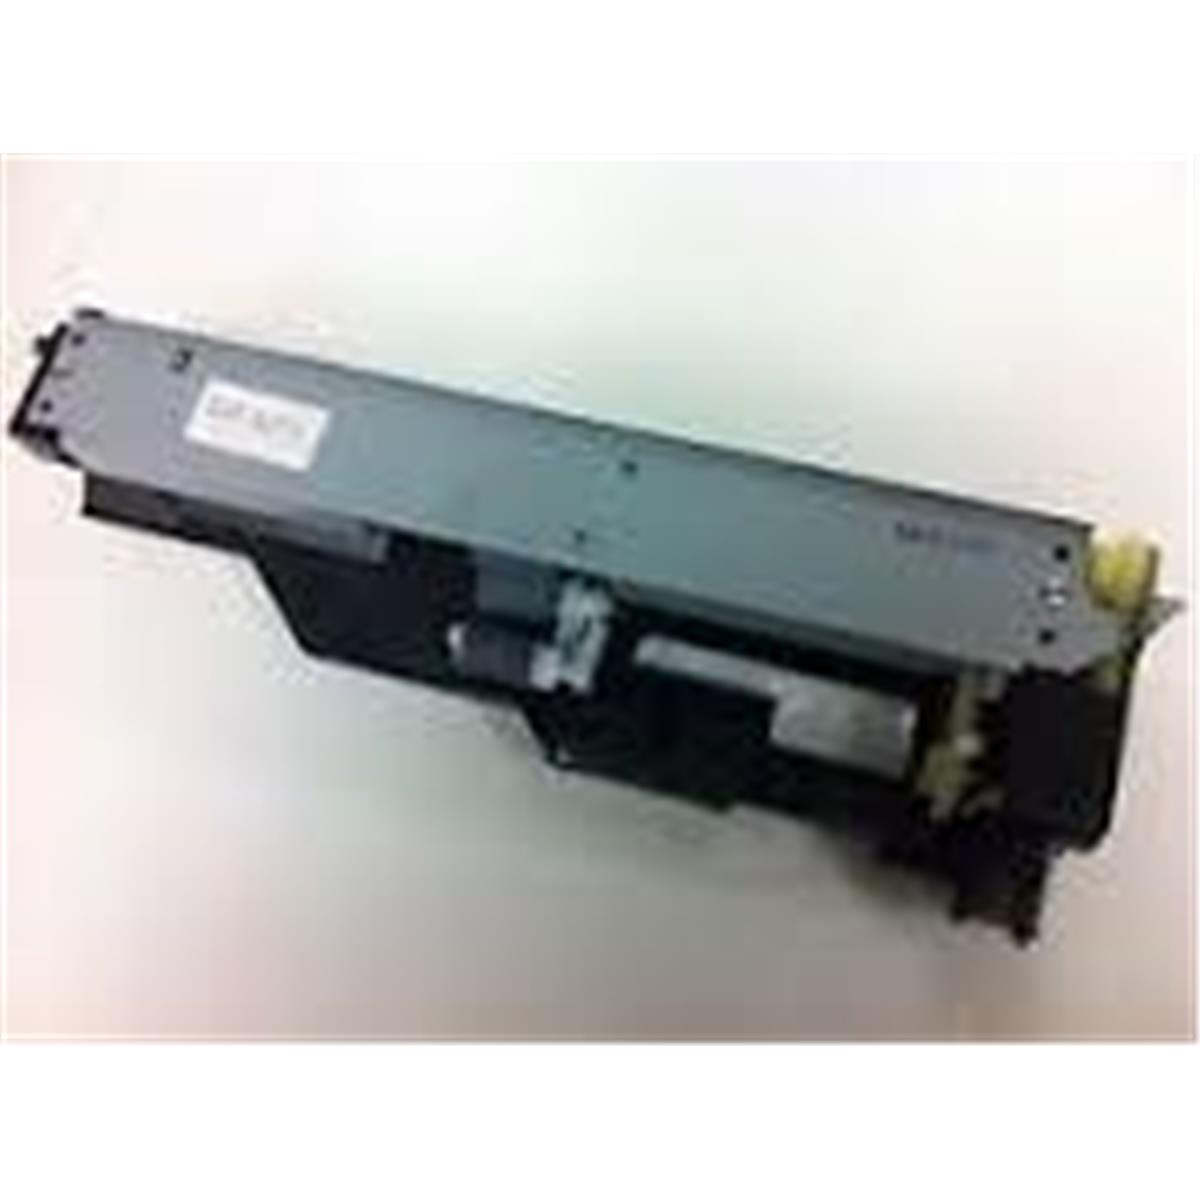 RM2-0341-OEM 500 Sheet Paper Feeder Paper Pickup Assembly -  HP